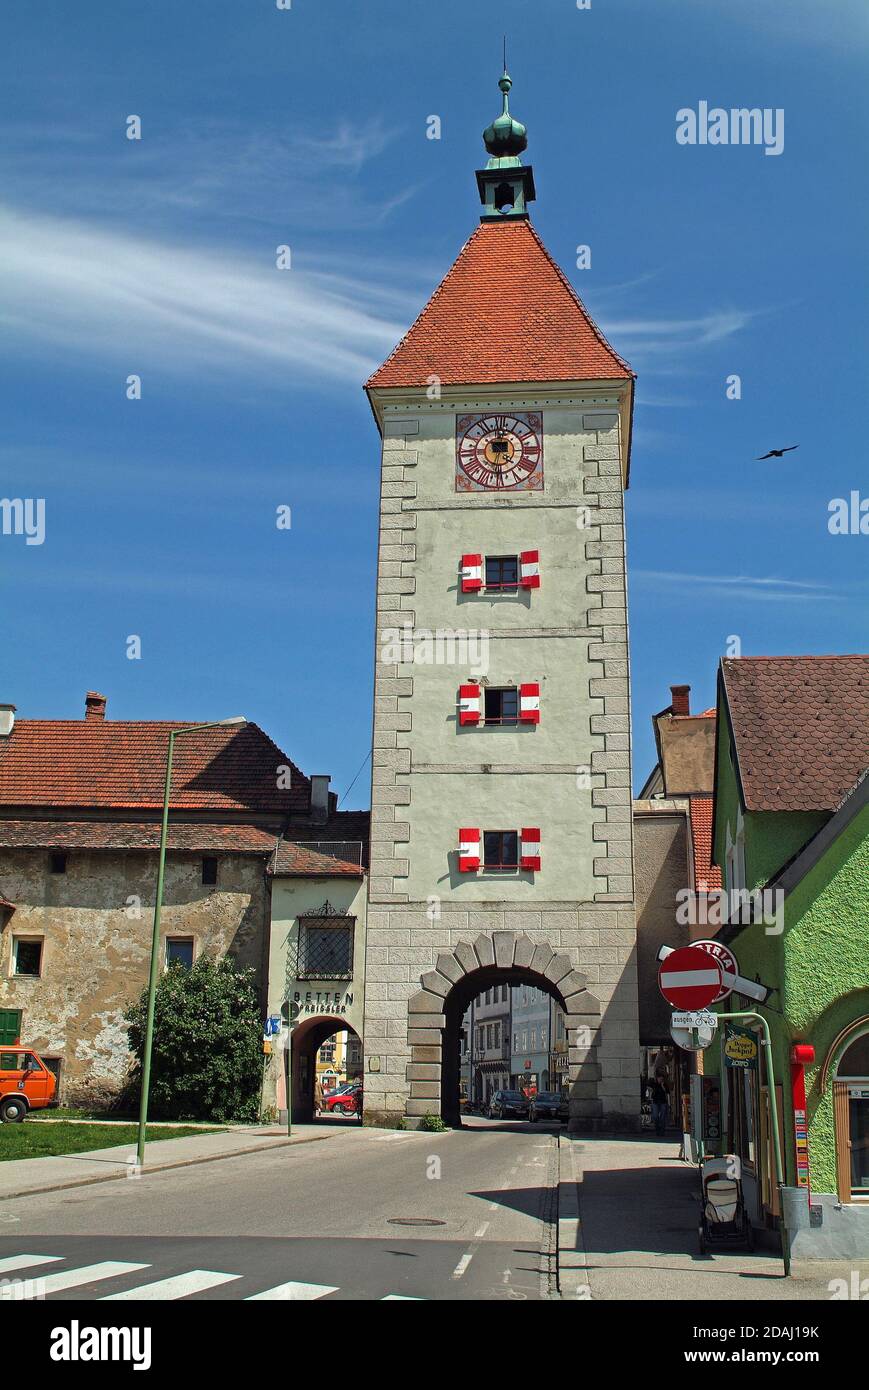 Wels, Austria - May 15, 2006: the city tower named Ledererturm integrated into the old city wall in the city in Upper Austria Stock Photo